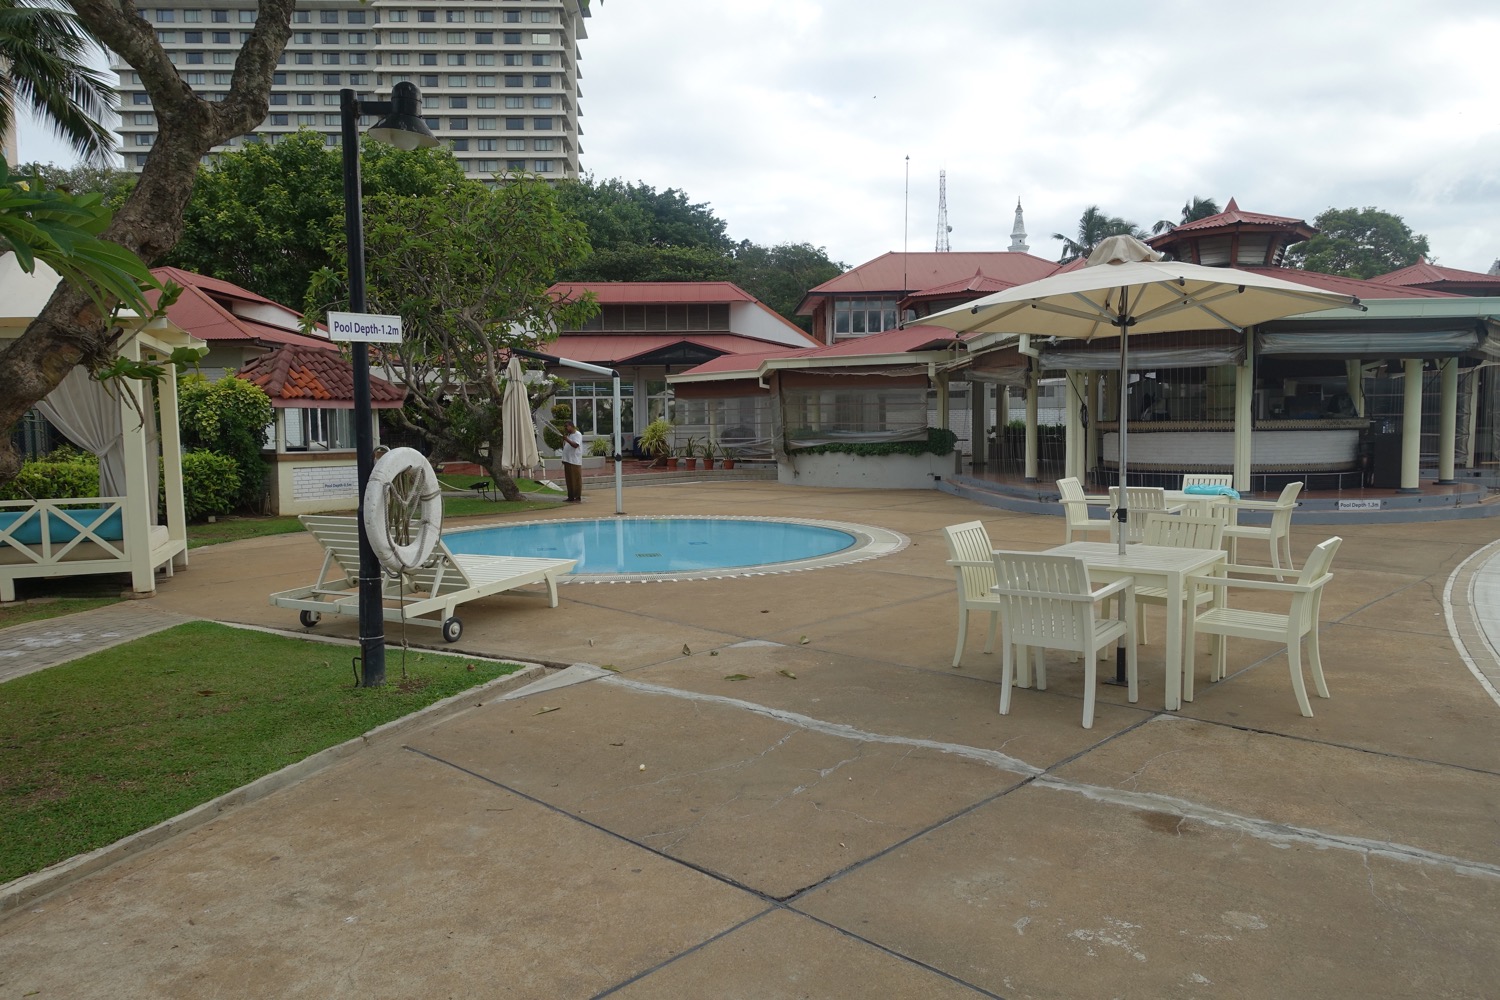 a pool with chairs and umbrellas in front of buildings